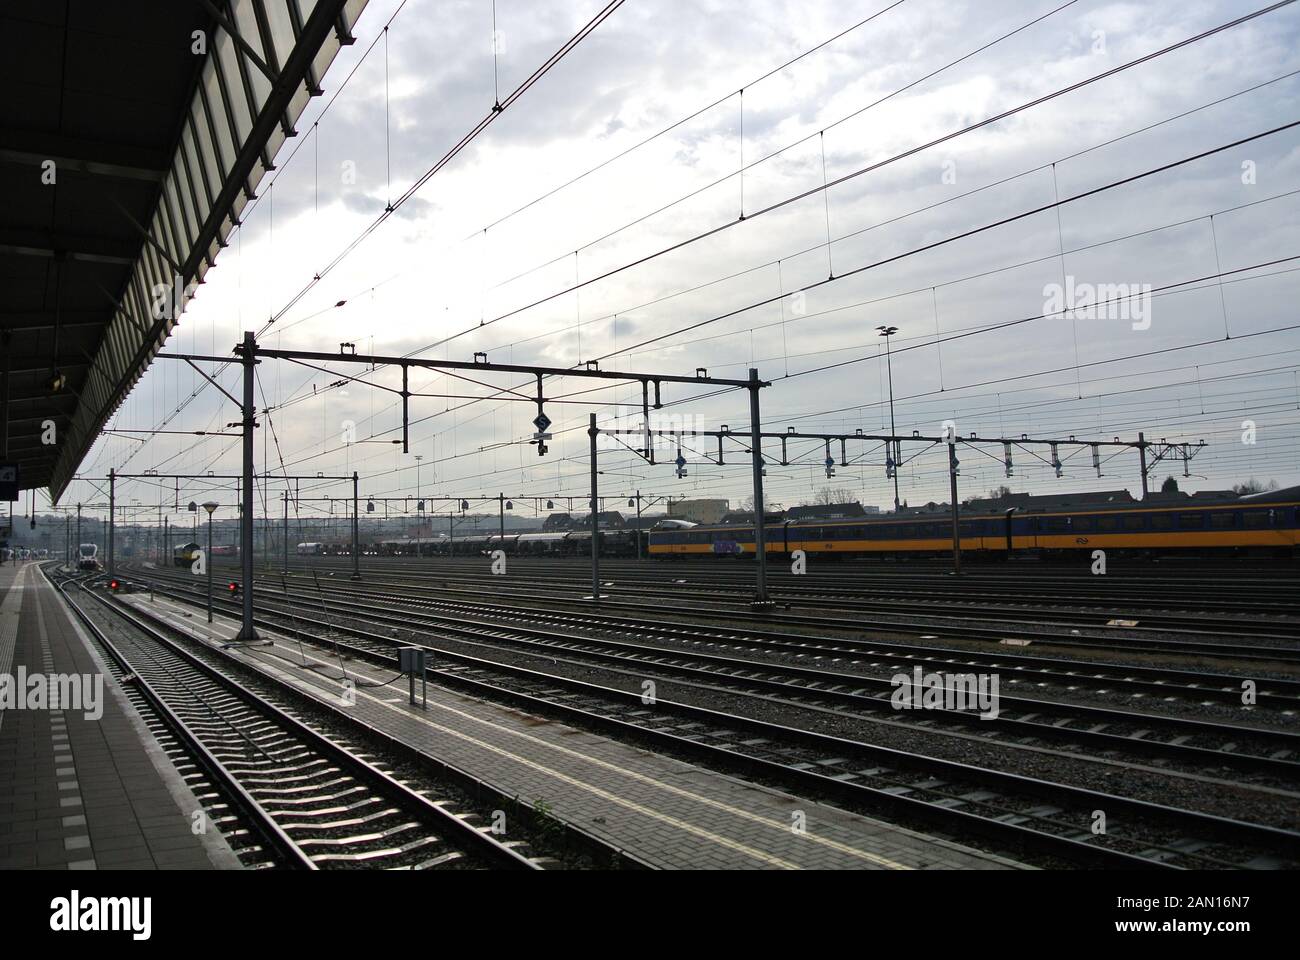 Overview of a railway shunting yard, Venlo, Netherlands. with waiting passenger and goods trains in the sidings. Stock Photo